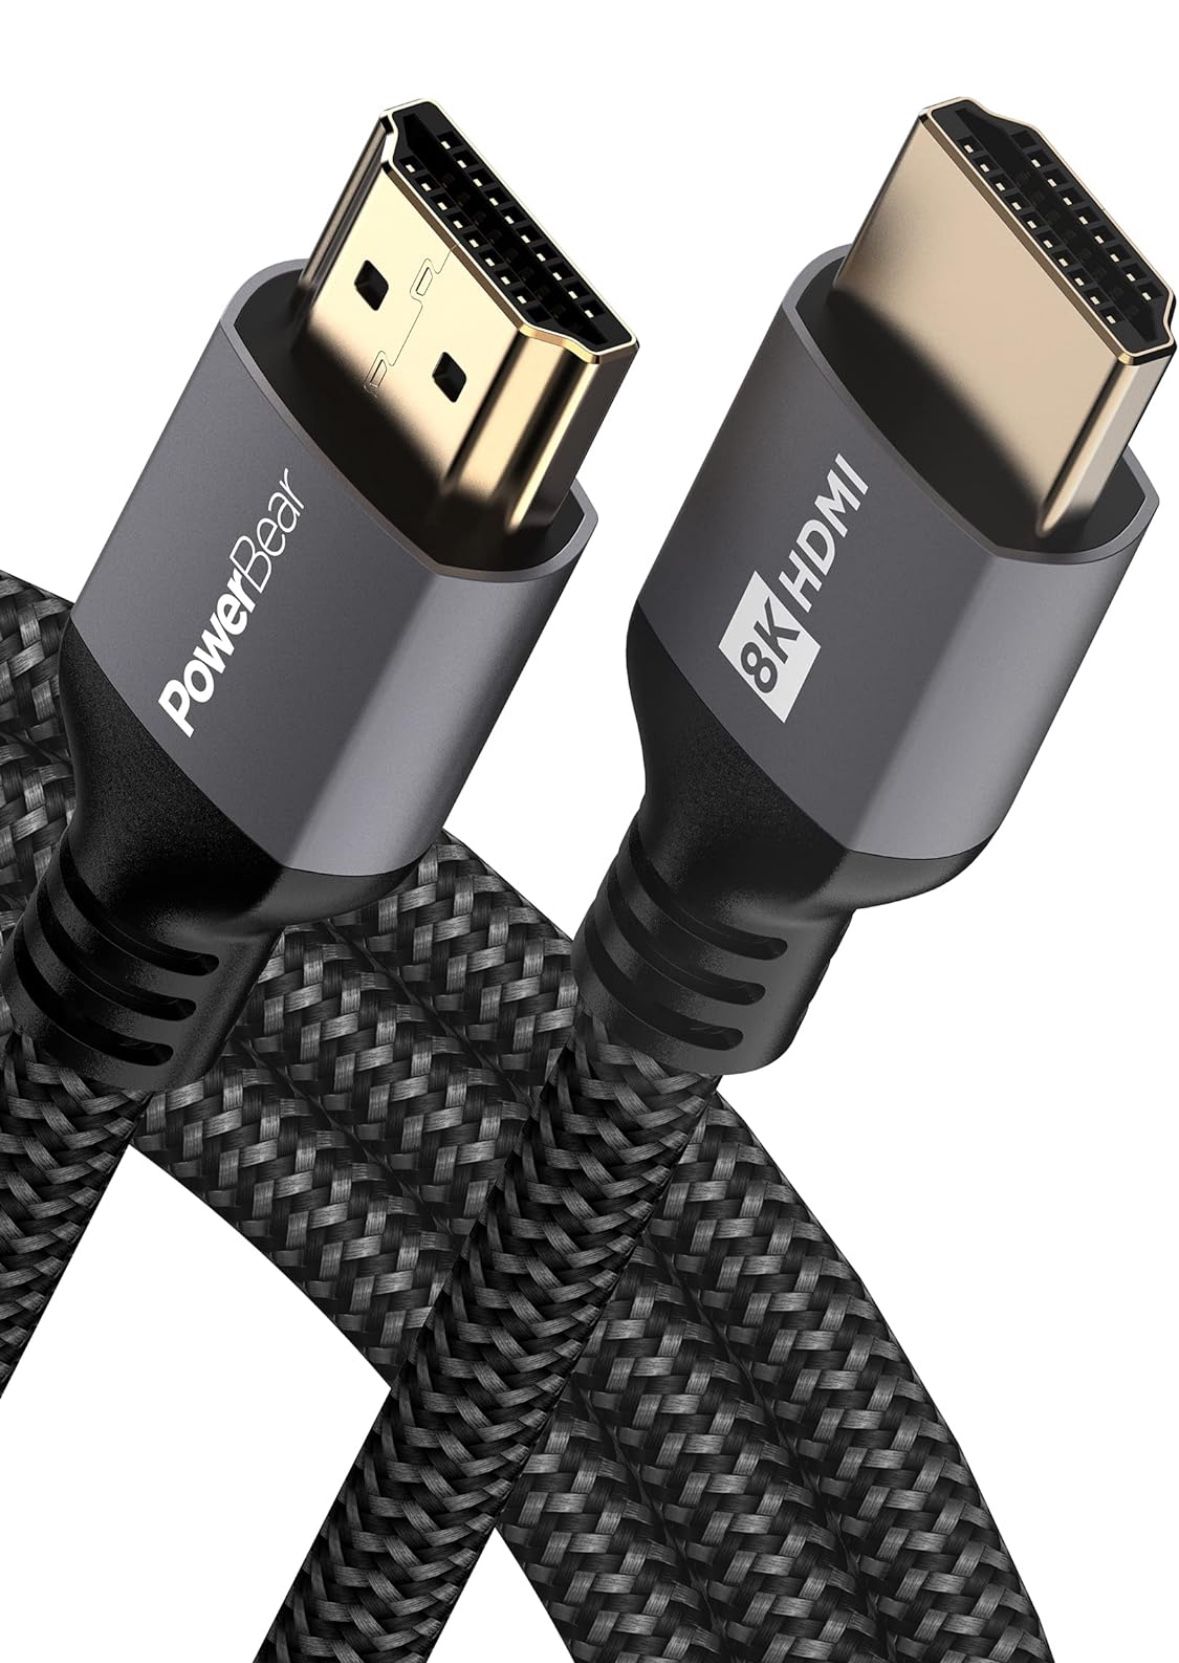 2 Pack PowerBear 8K@60Hz HDMI 2.1 Cable 6 ft | 48Gbps Ultra High Speed 4K@120Hz